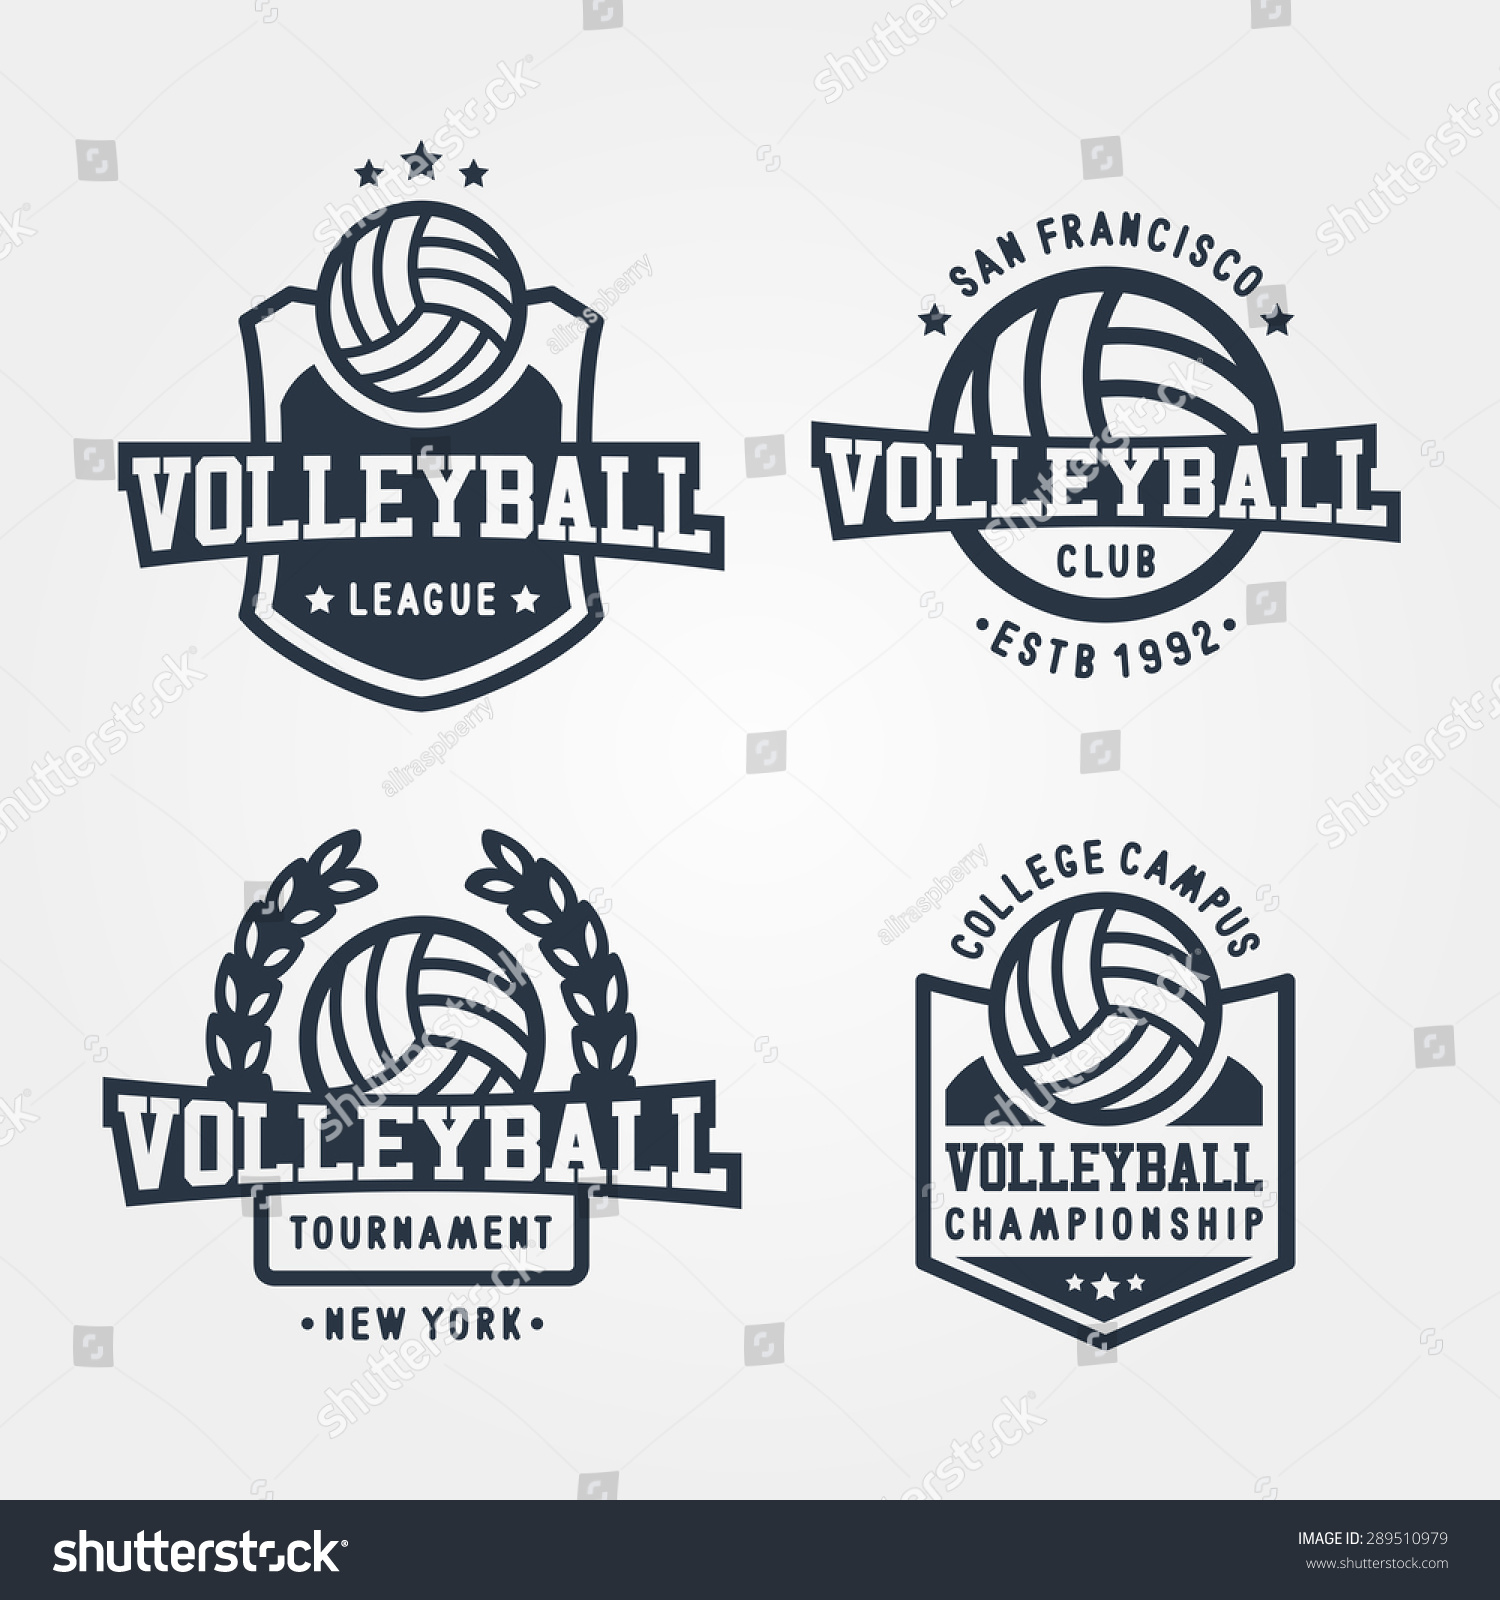 volleyball clipart for t shirts - photo #20